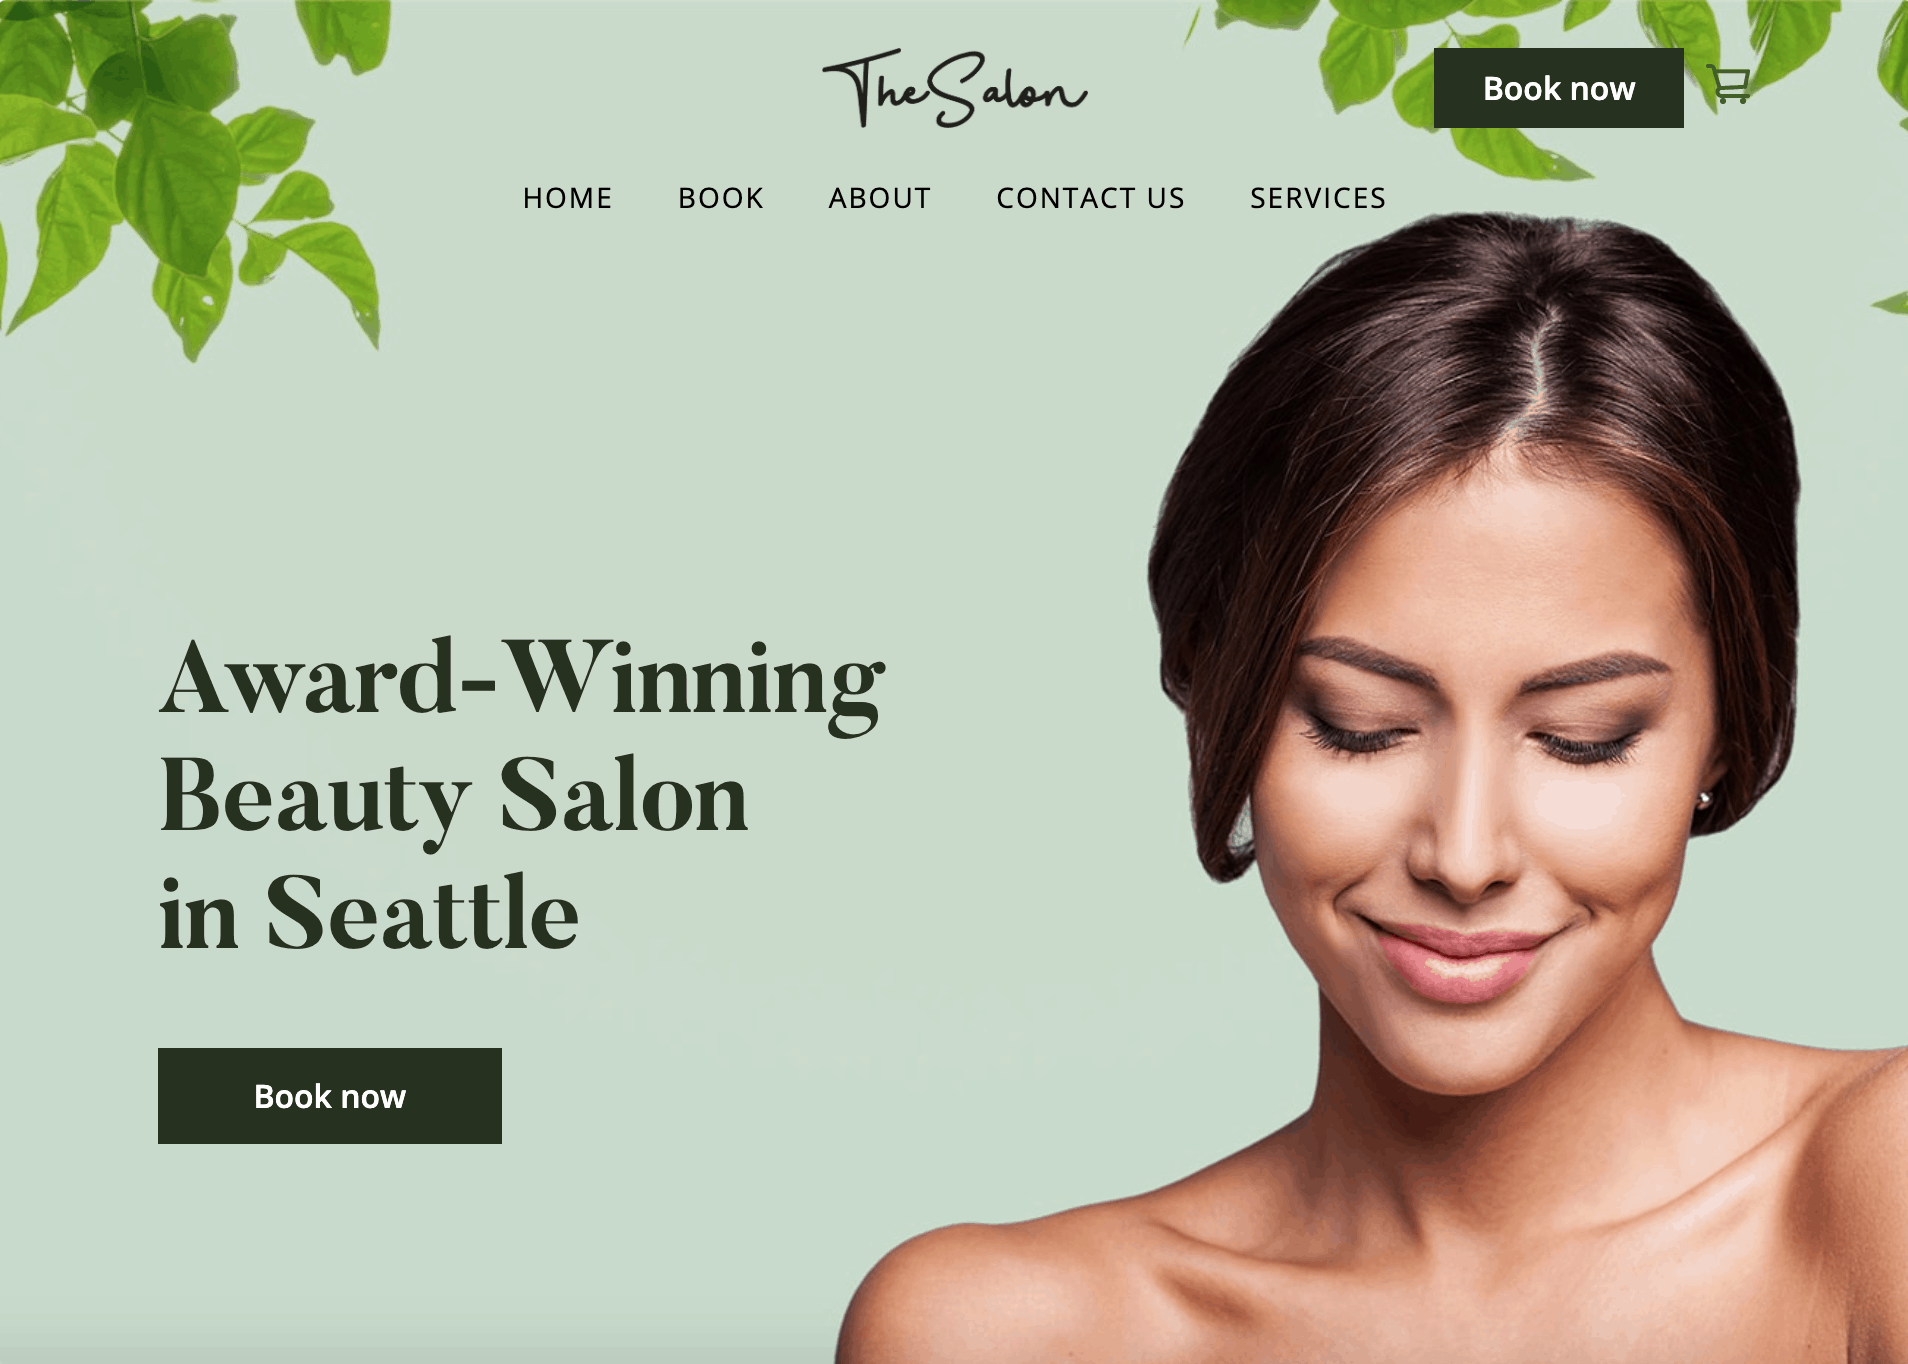 Square online store website example for salon